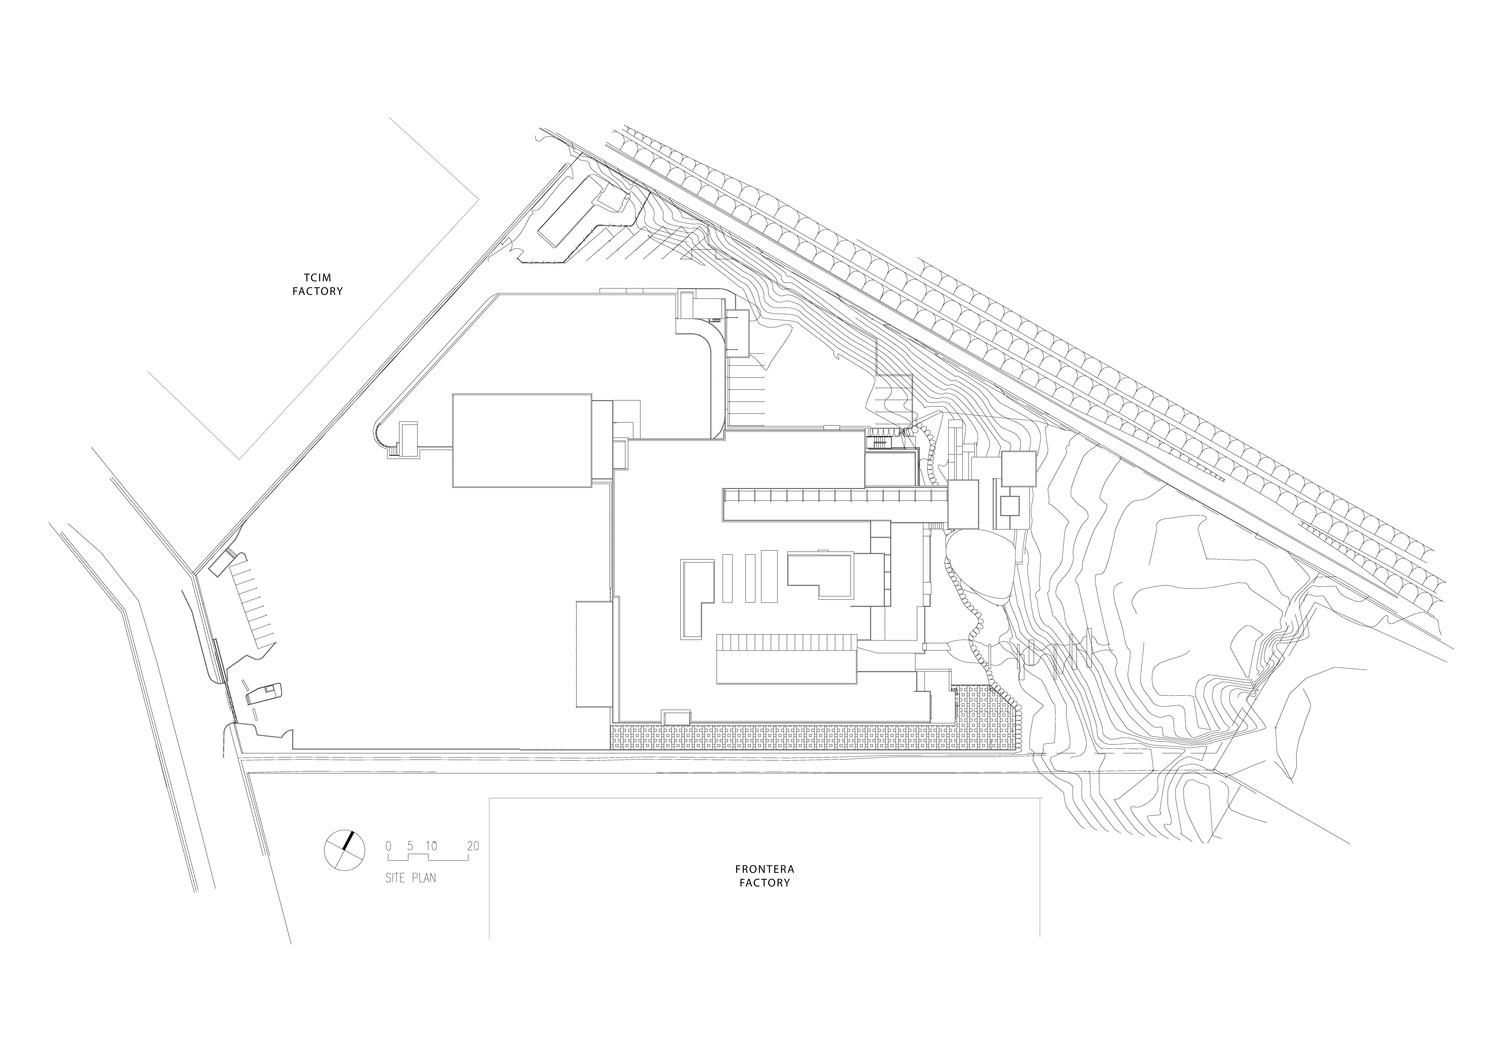 Site plan - industrial factories flank the building so all views are oriented to the courtyards and the rocky outcrop at rear of site